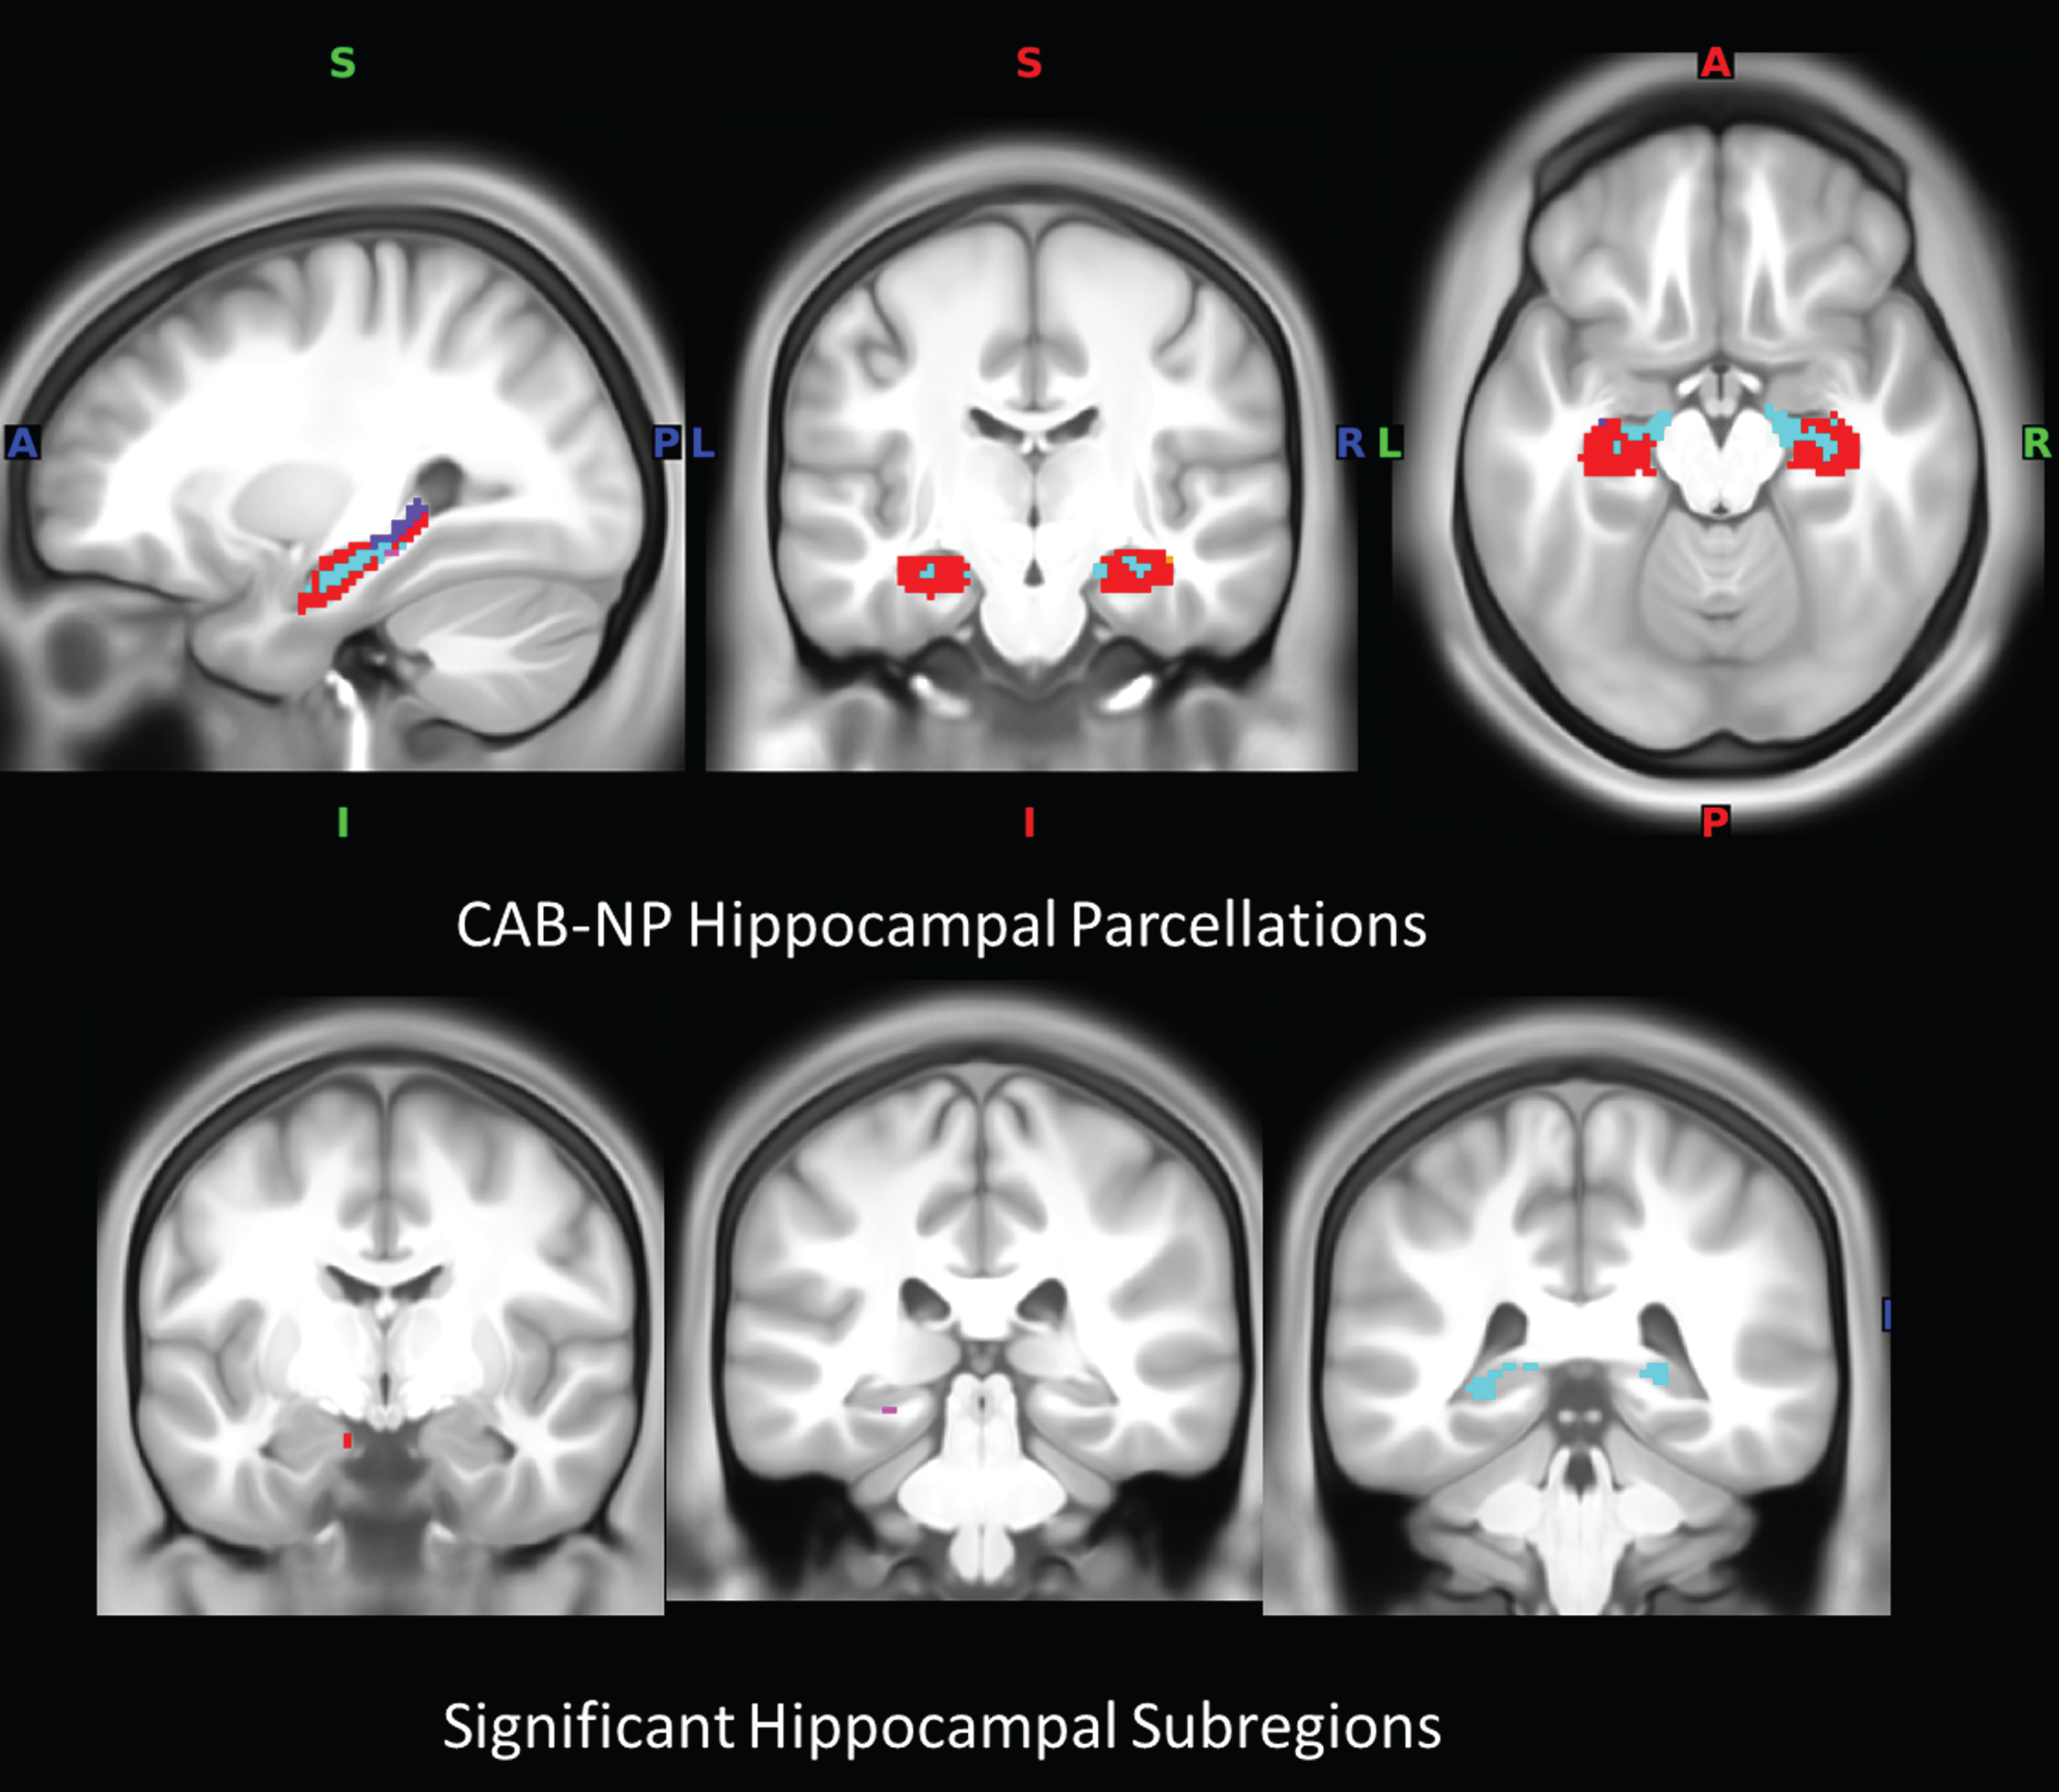 Hippocampal subregions. a) Hippocampal parcellations in the CAB-NP atlas color-coded according to assigned network (note: not all parcellations are visible). b) Location of hippocampal subregions with significance in the connectivity analysis. Red, default mode network; magenta, auditory network; cyan, somatomotor network; blue, primary visual network; CAB-NP, Cole-Anticevic brain network parcellation.